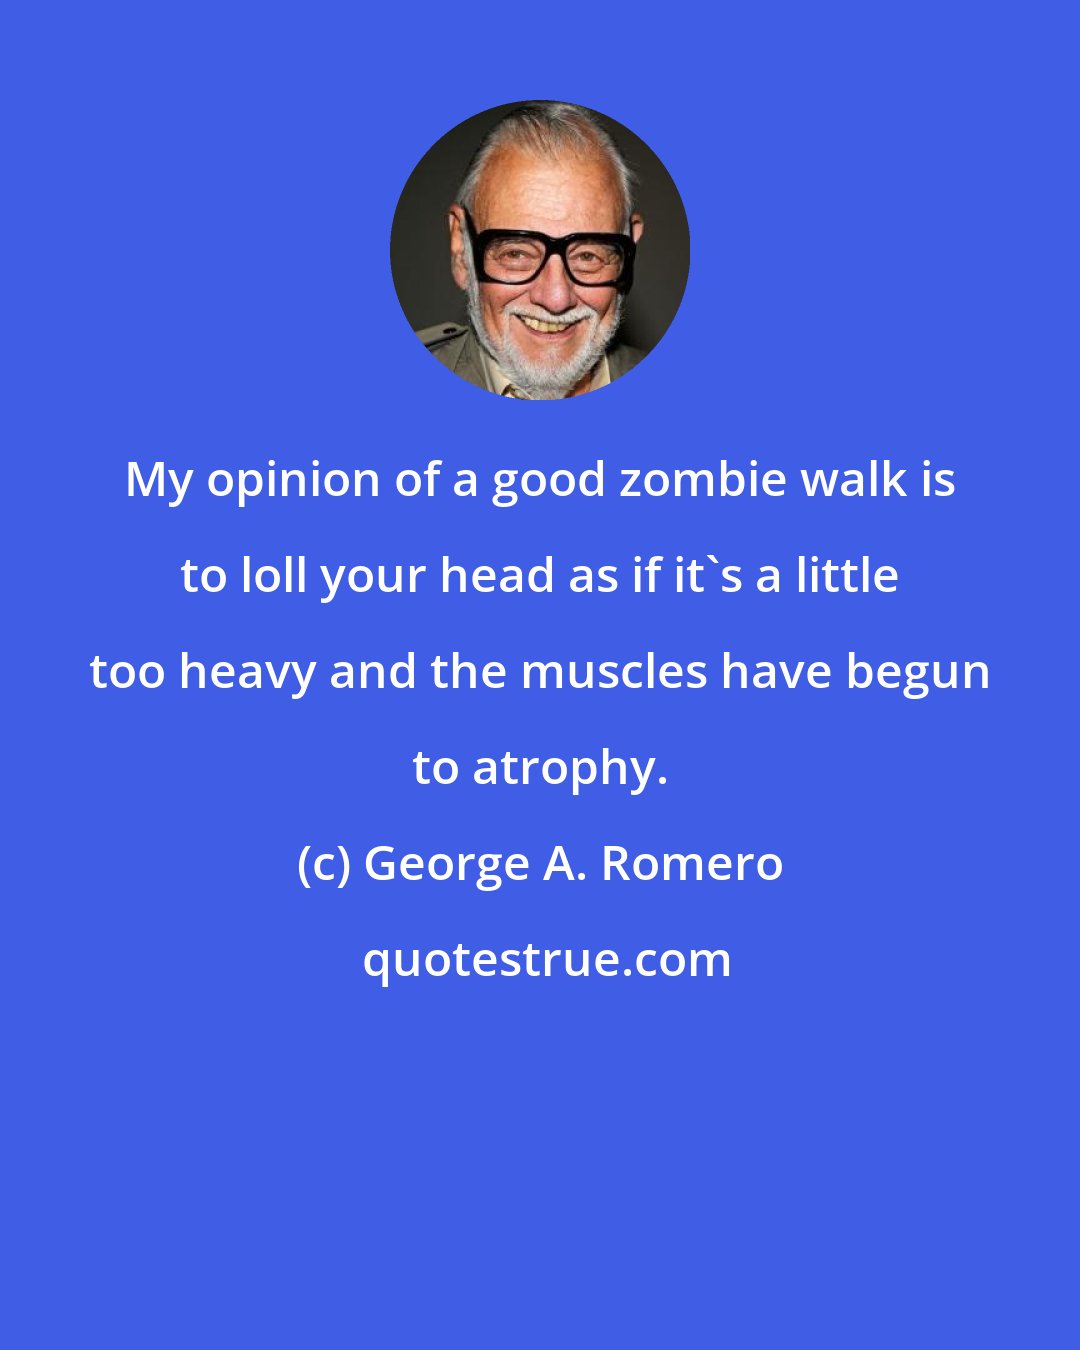 George A. Romero: My opinion of a good zombie walk is to loll your head as if it's a little too heavy and the muscles have begun to atrophy.